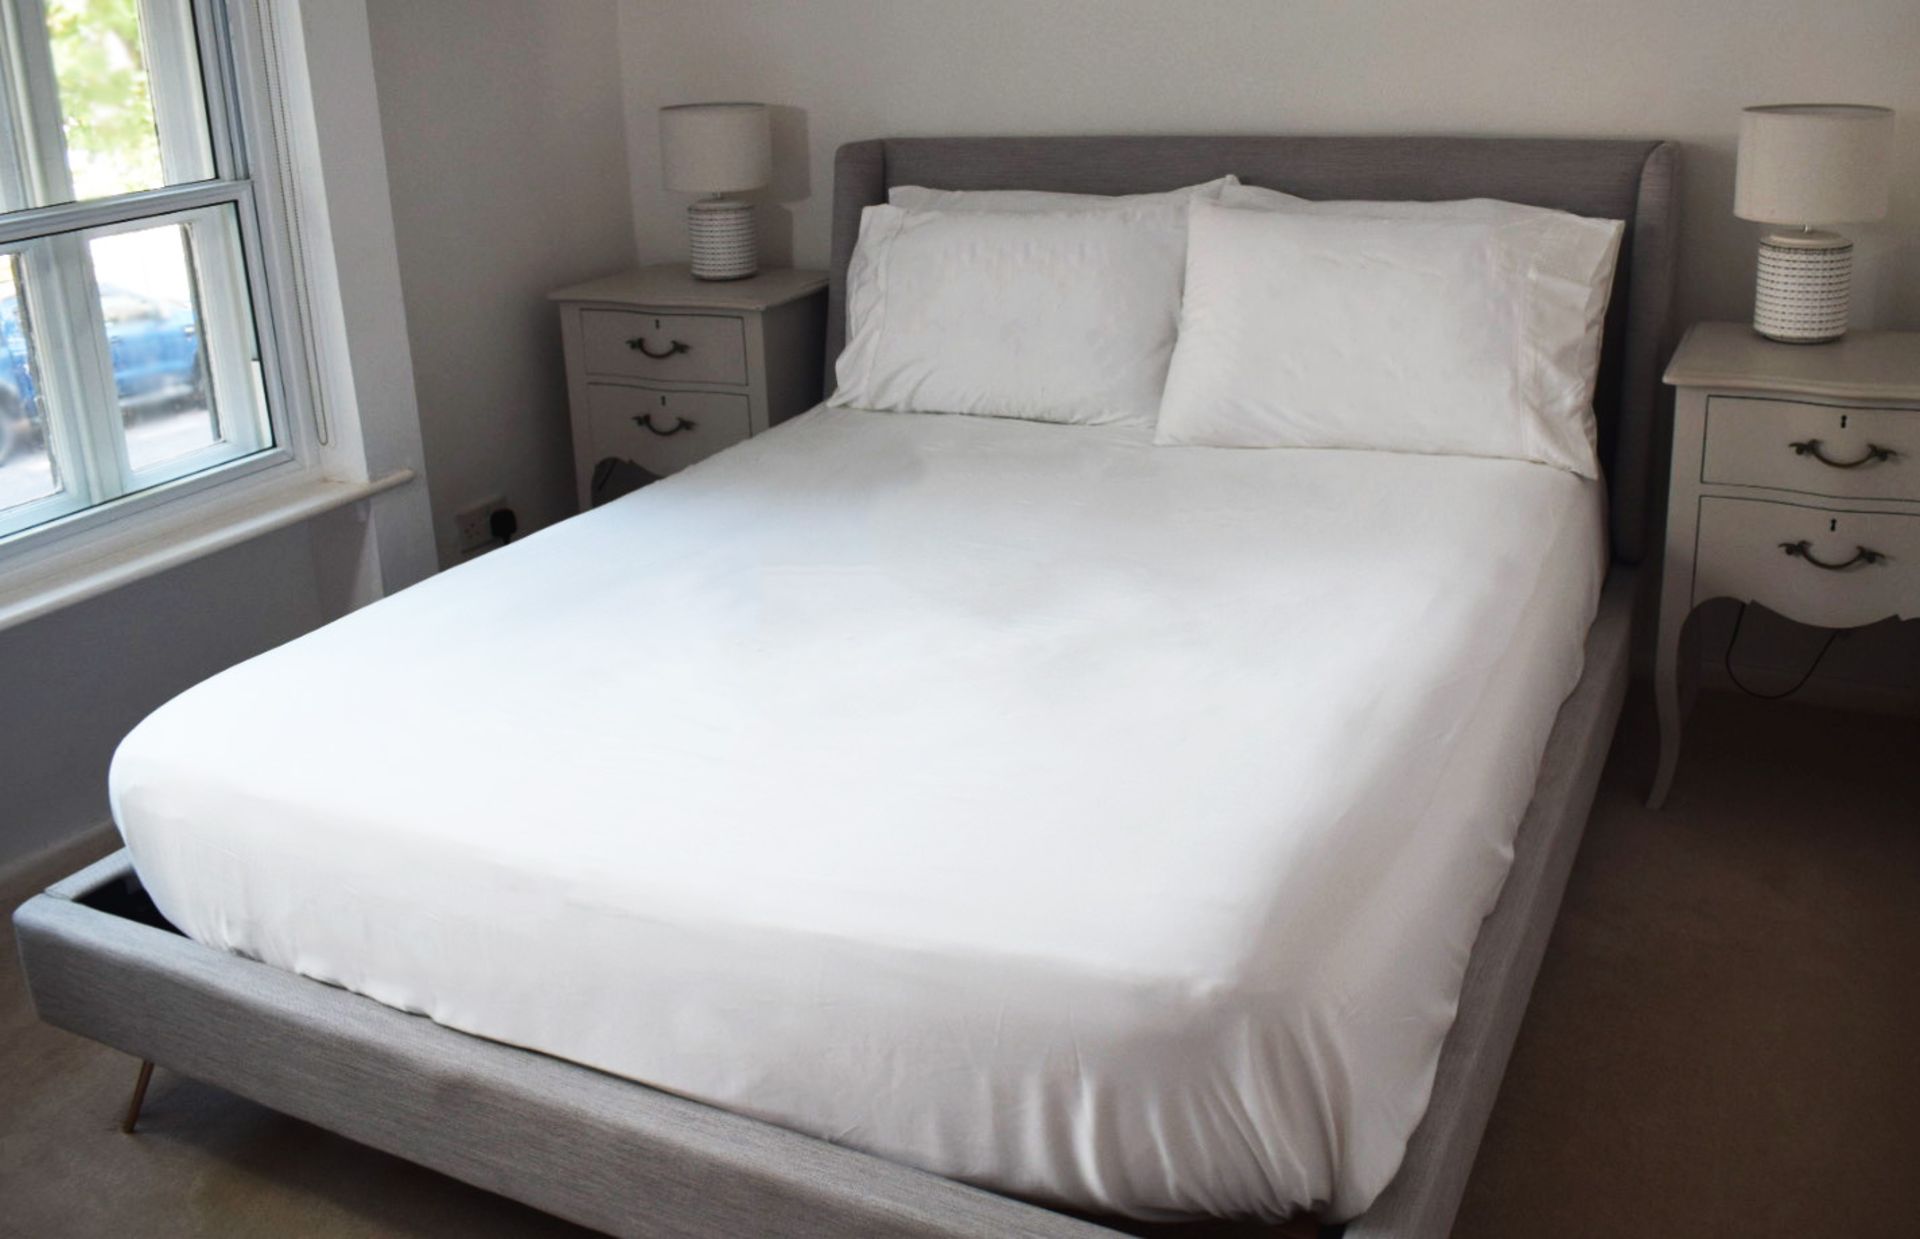 6 x White Bamboo Bed Linen Set (Double) - Duvet Cover, Fitted Sheet, Flat Sheet, 2 Pillowcases - Image 2 of 9